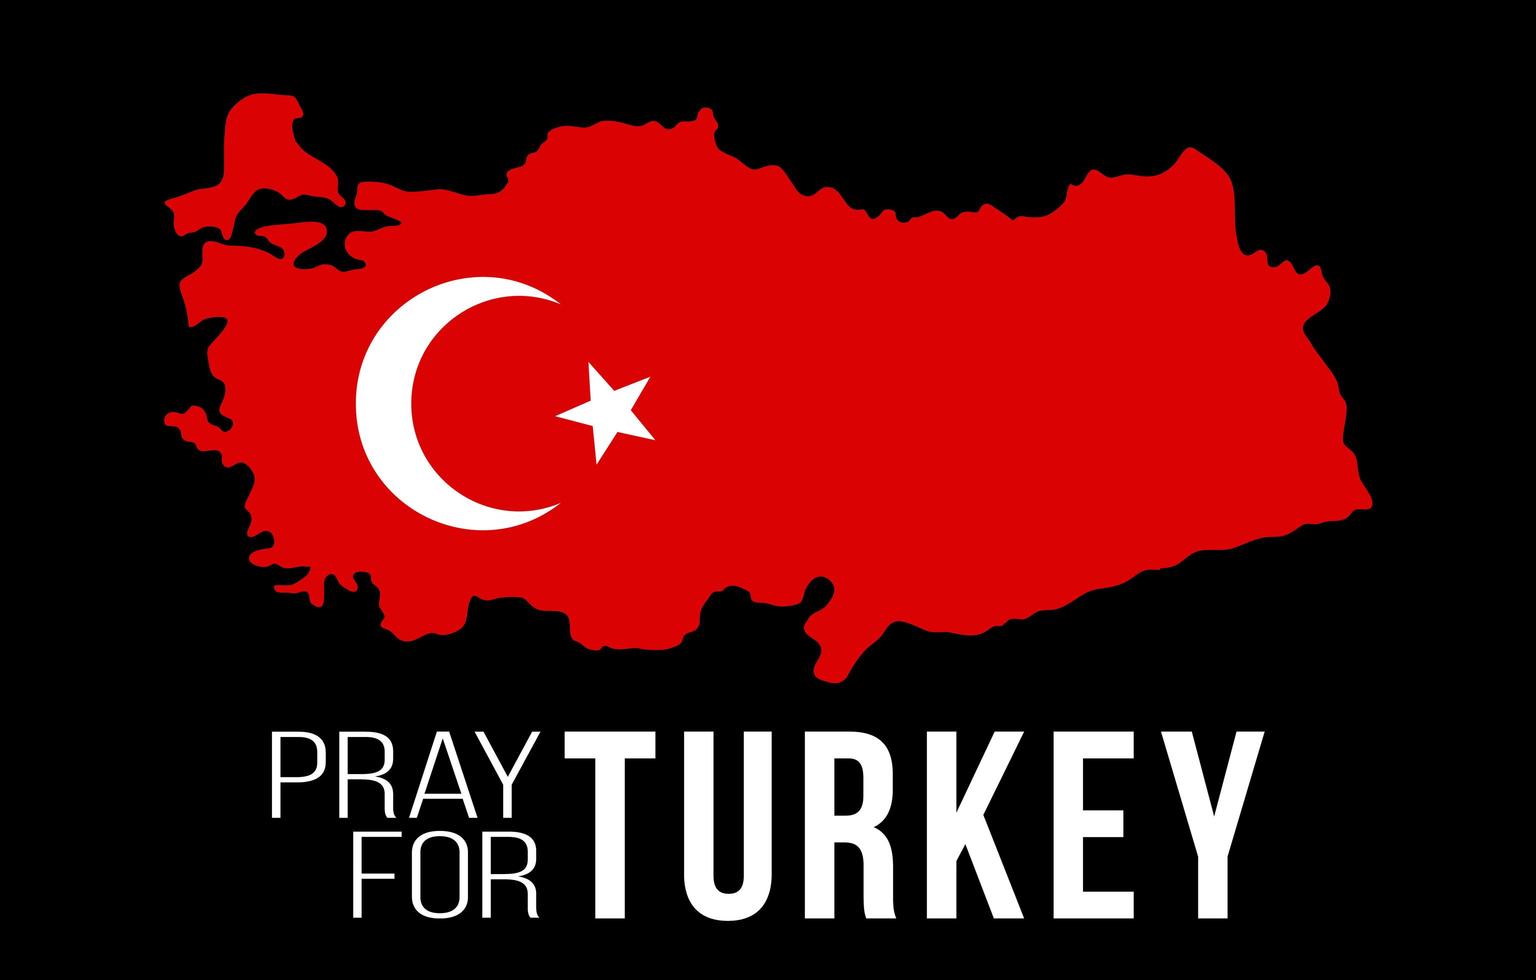 Pray for Turkey. Vector illustration of a map of Turkey with the text asking for prayers due to a strong earthquake near Izmir on October 30